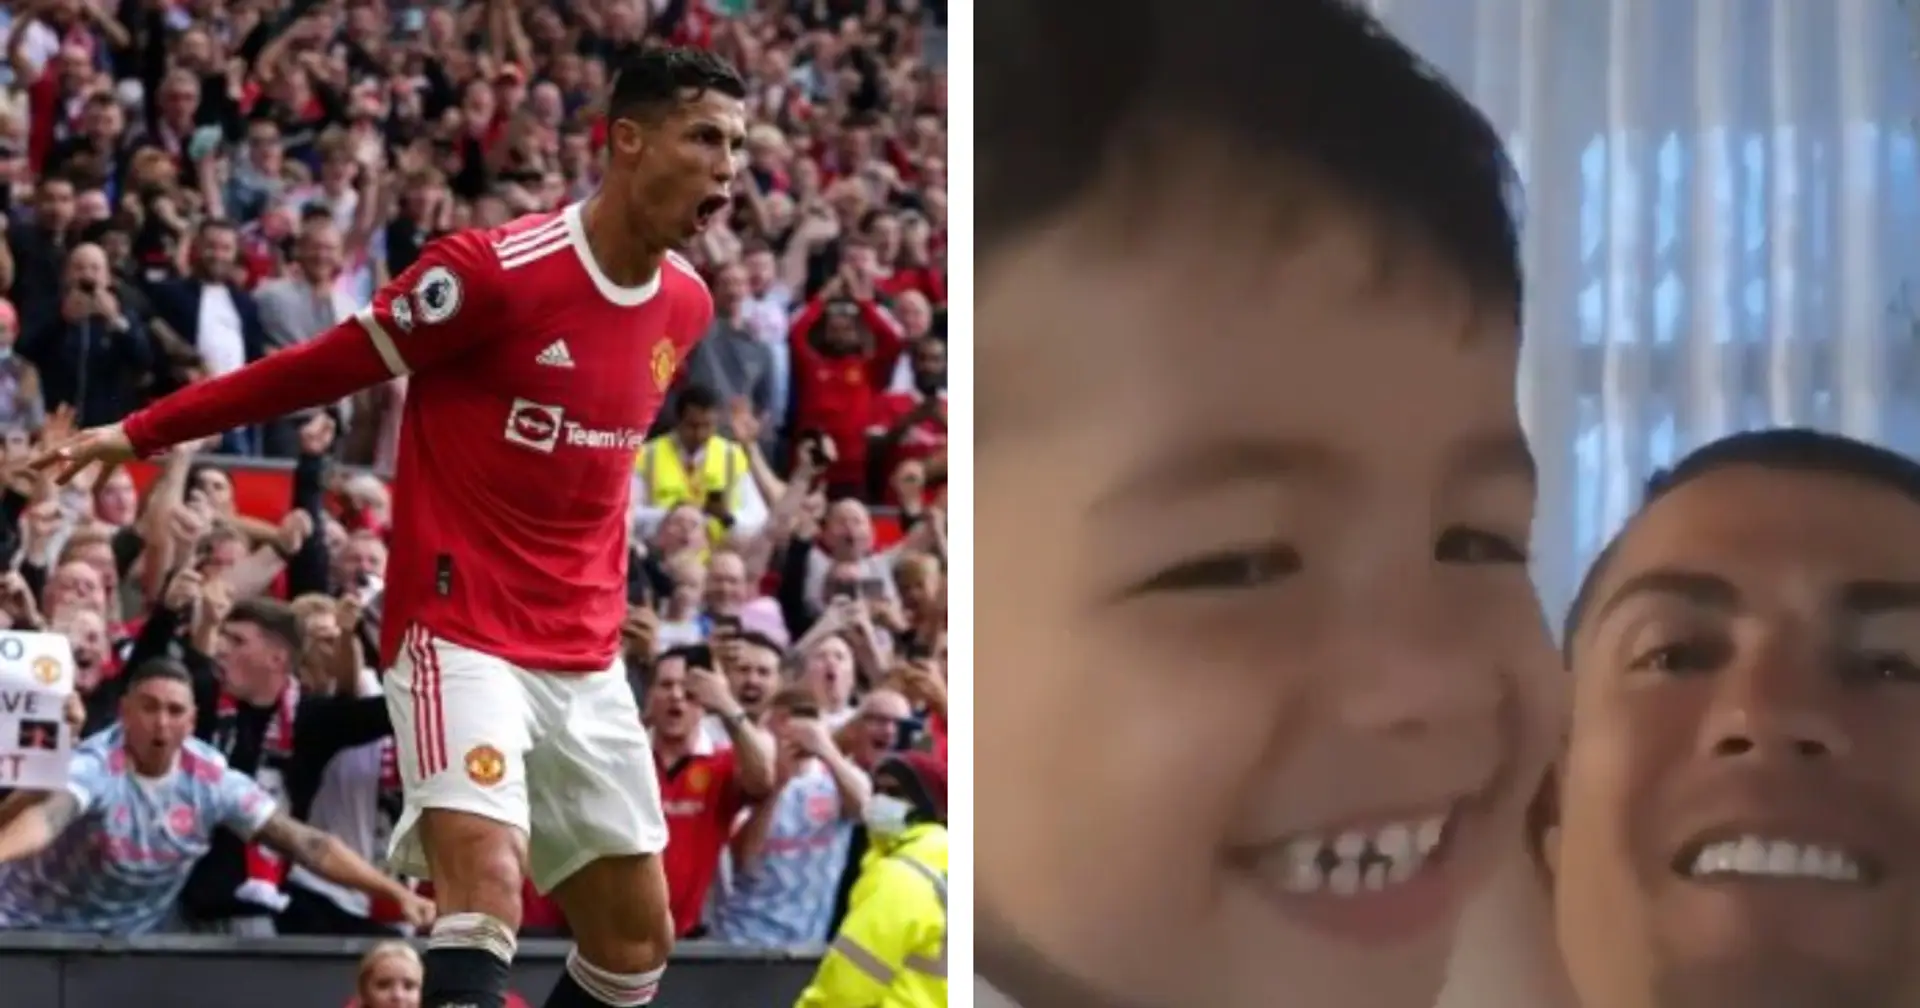 Cristiano Ronaldo teaching his son 'SIIIIUUUUU' celebration is most adorable thing on internet today